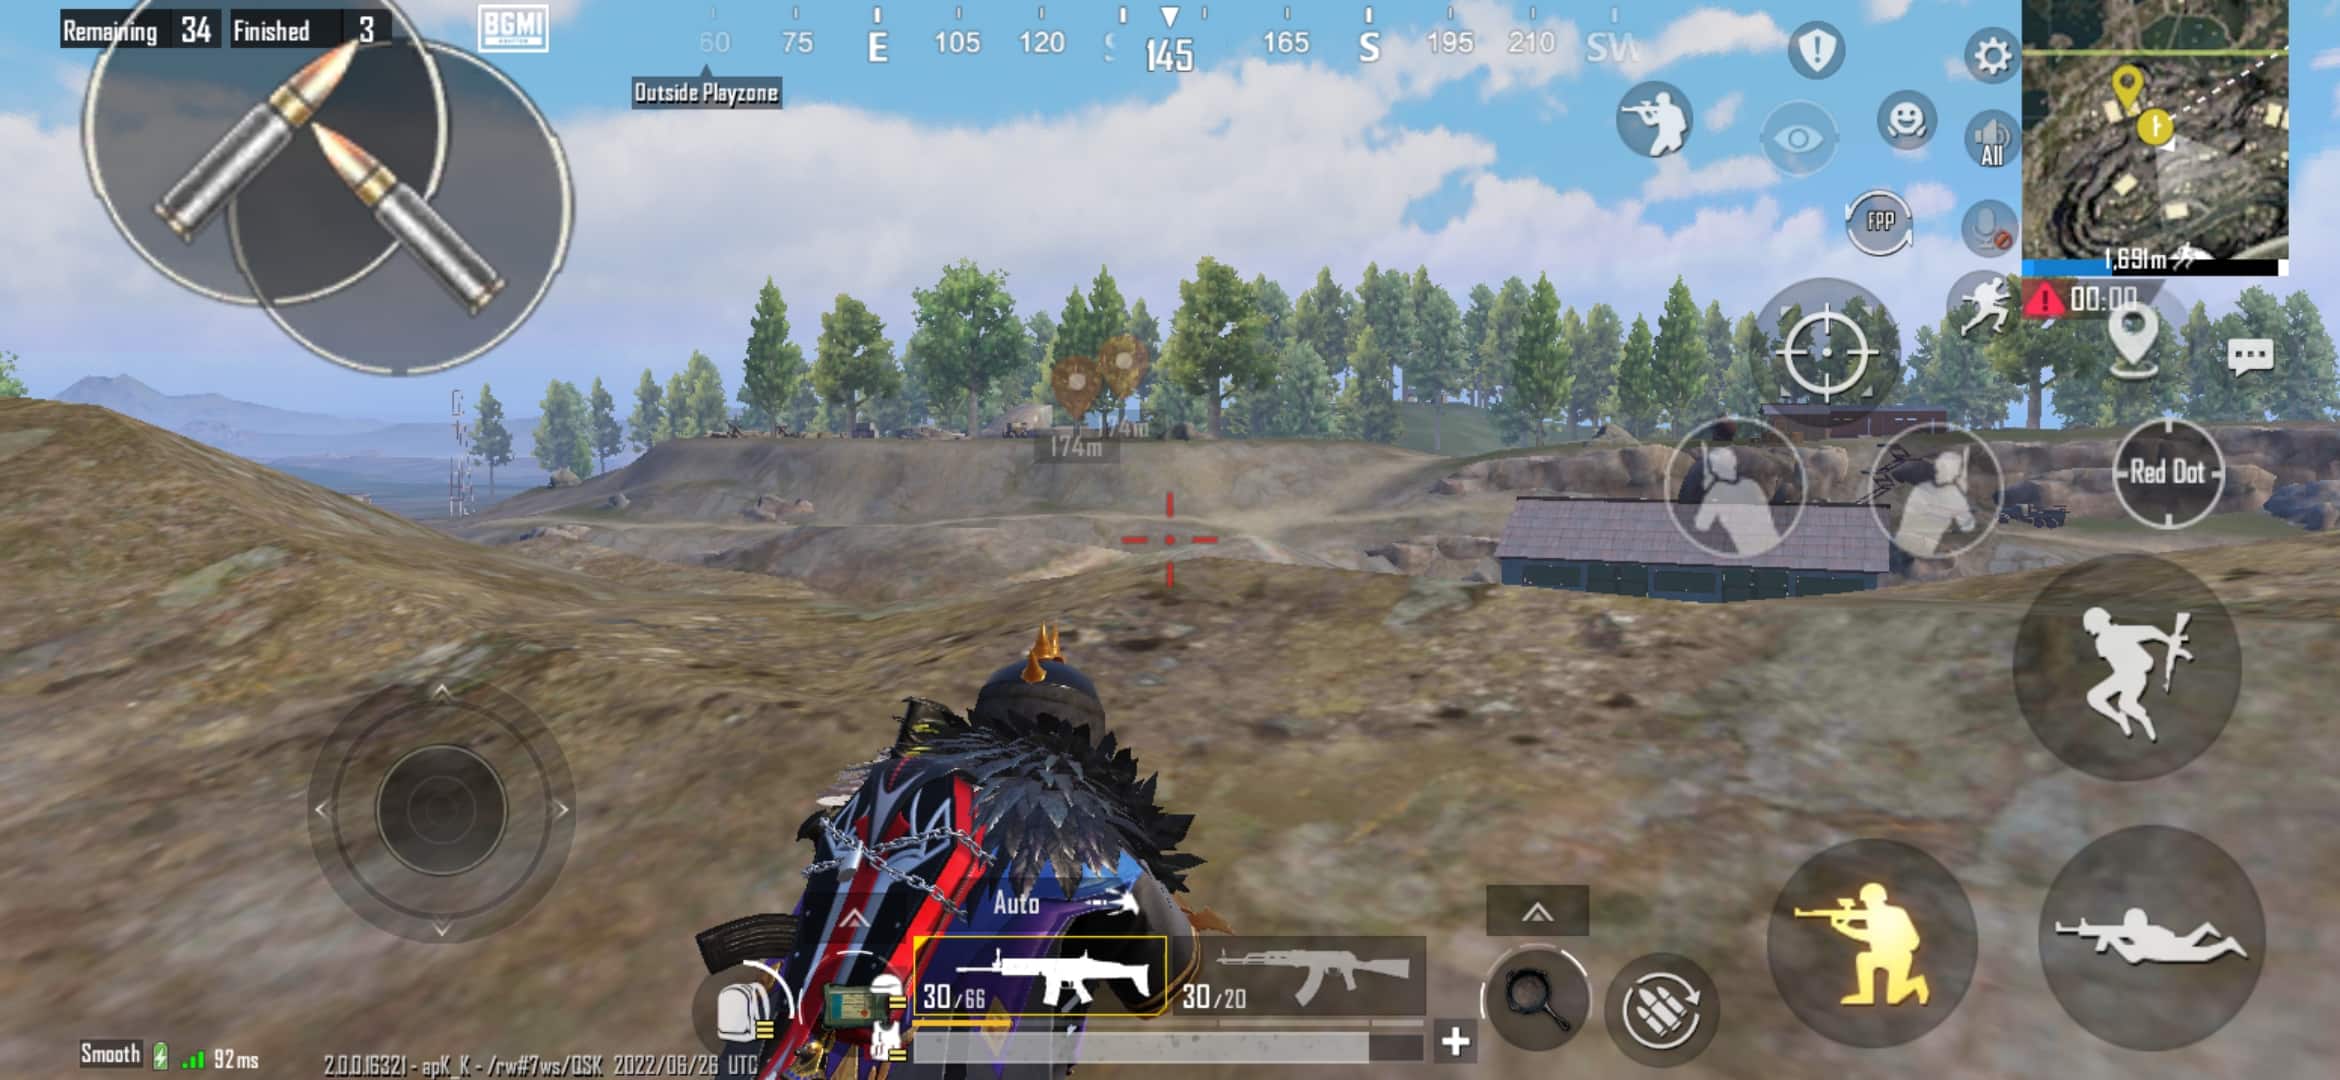 Tips to improve map awareness in BGMI mobile